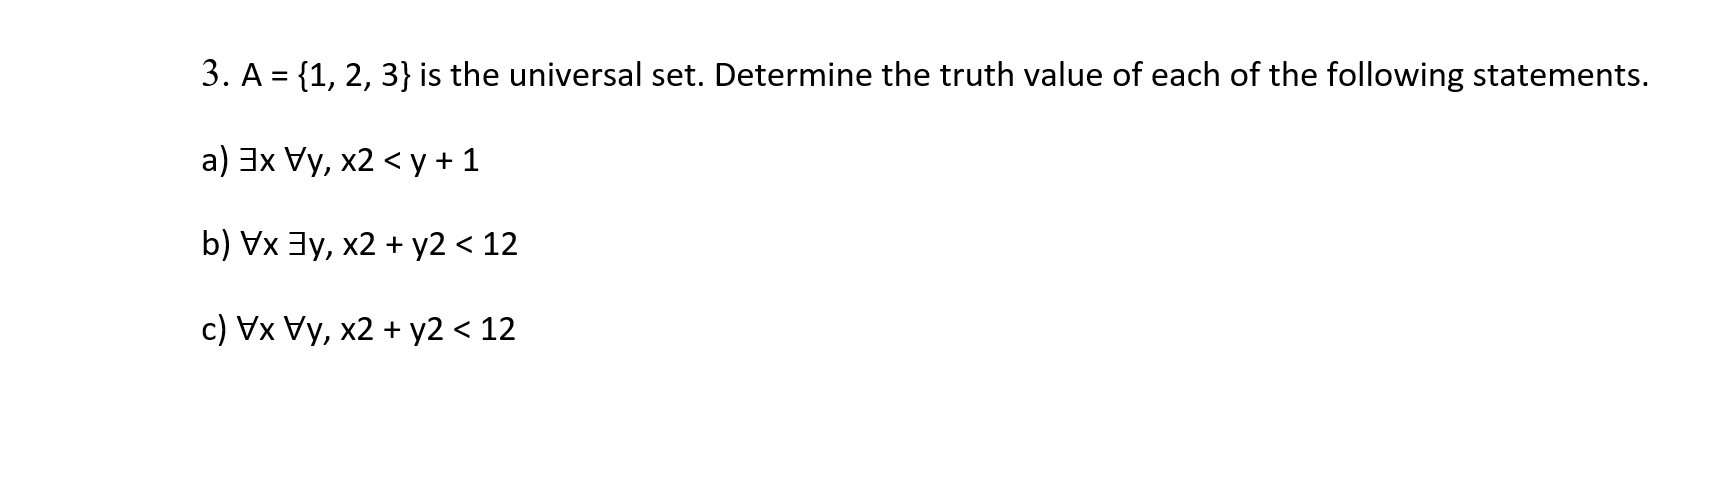 3. A = {1, 2, 3} is the universal set. Determine the truth value of each of the following statements.
a) 3x Vy, x2 < y +1
b) Vx 3y, x2 + y2 < 12
